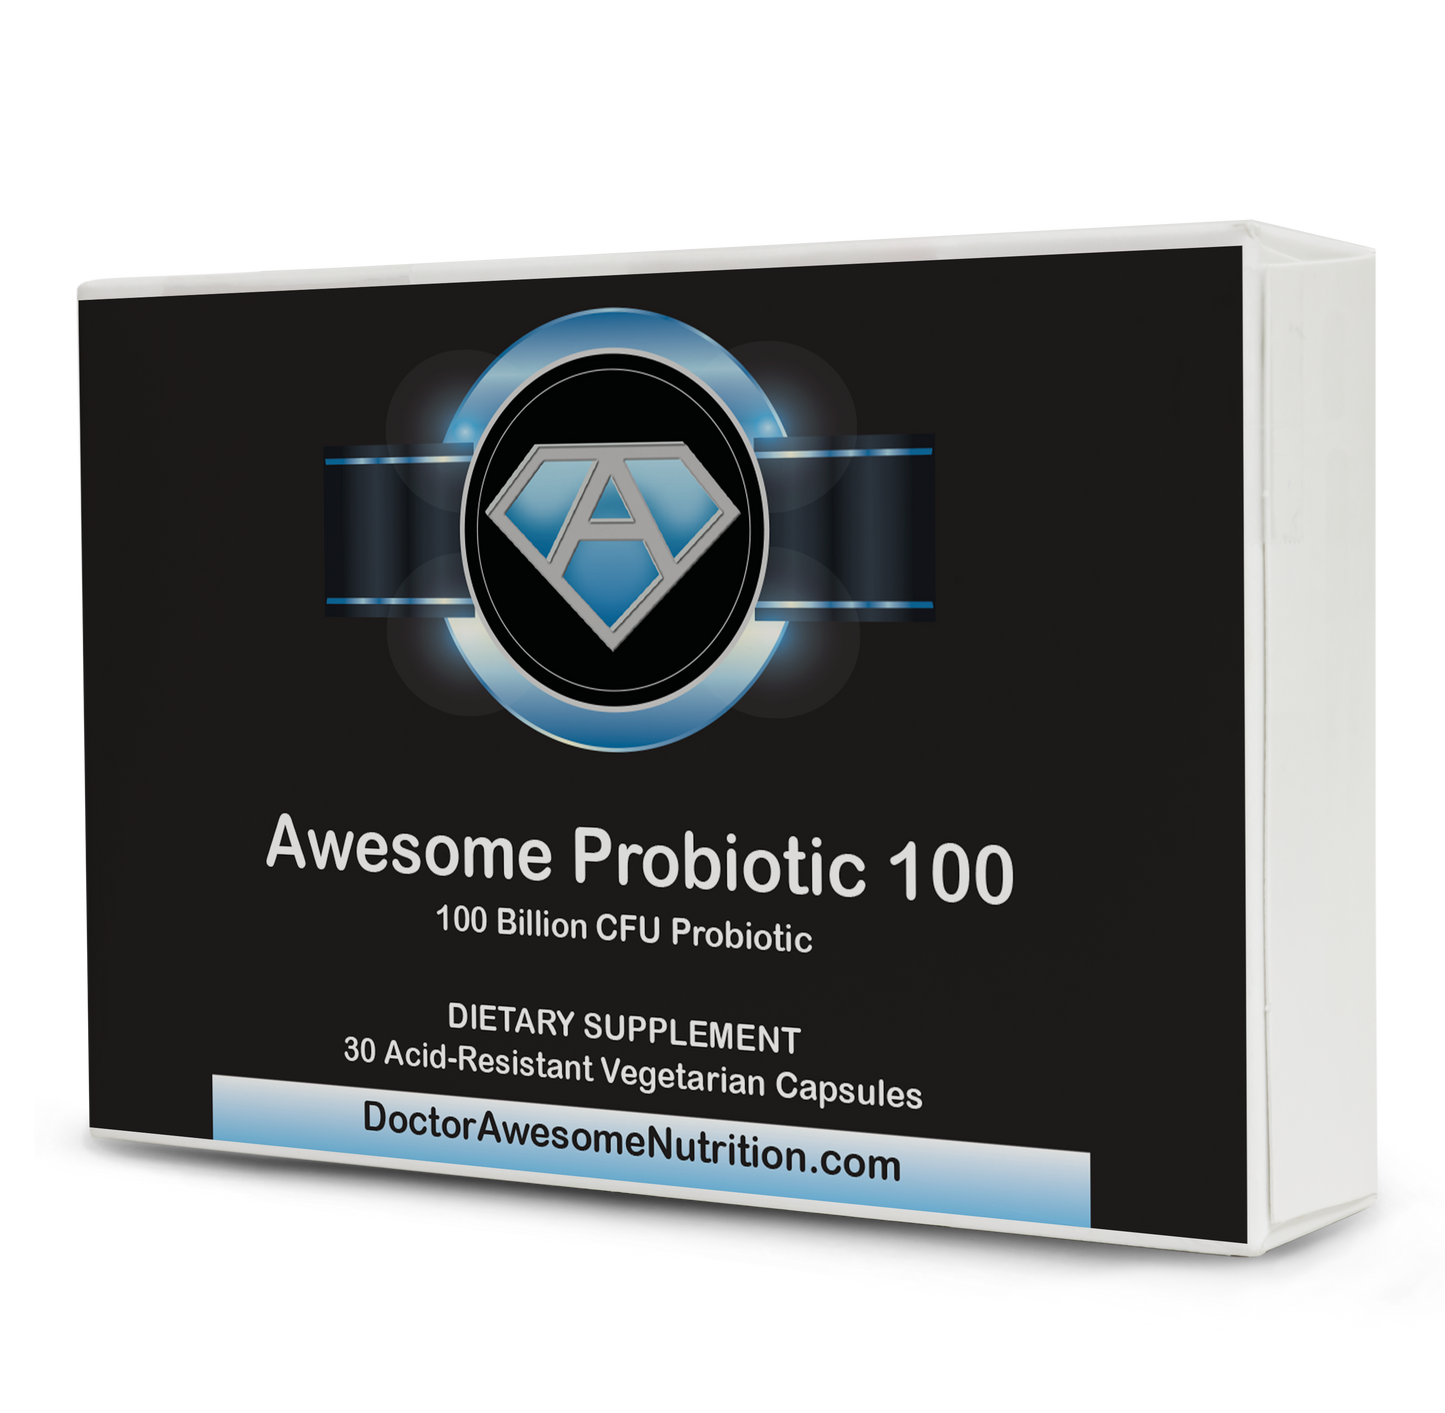 Awesome Probiotic 100